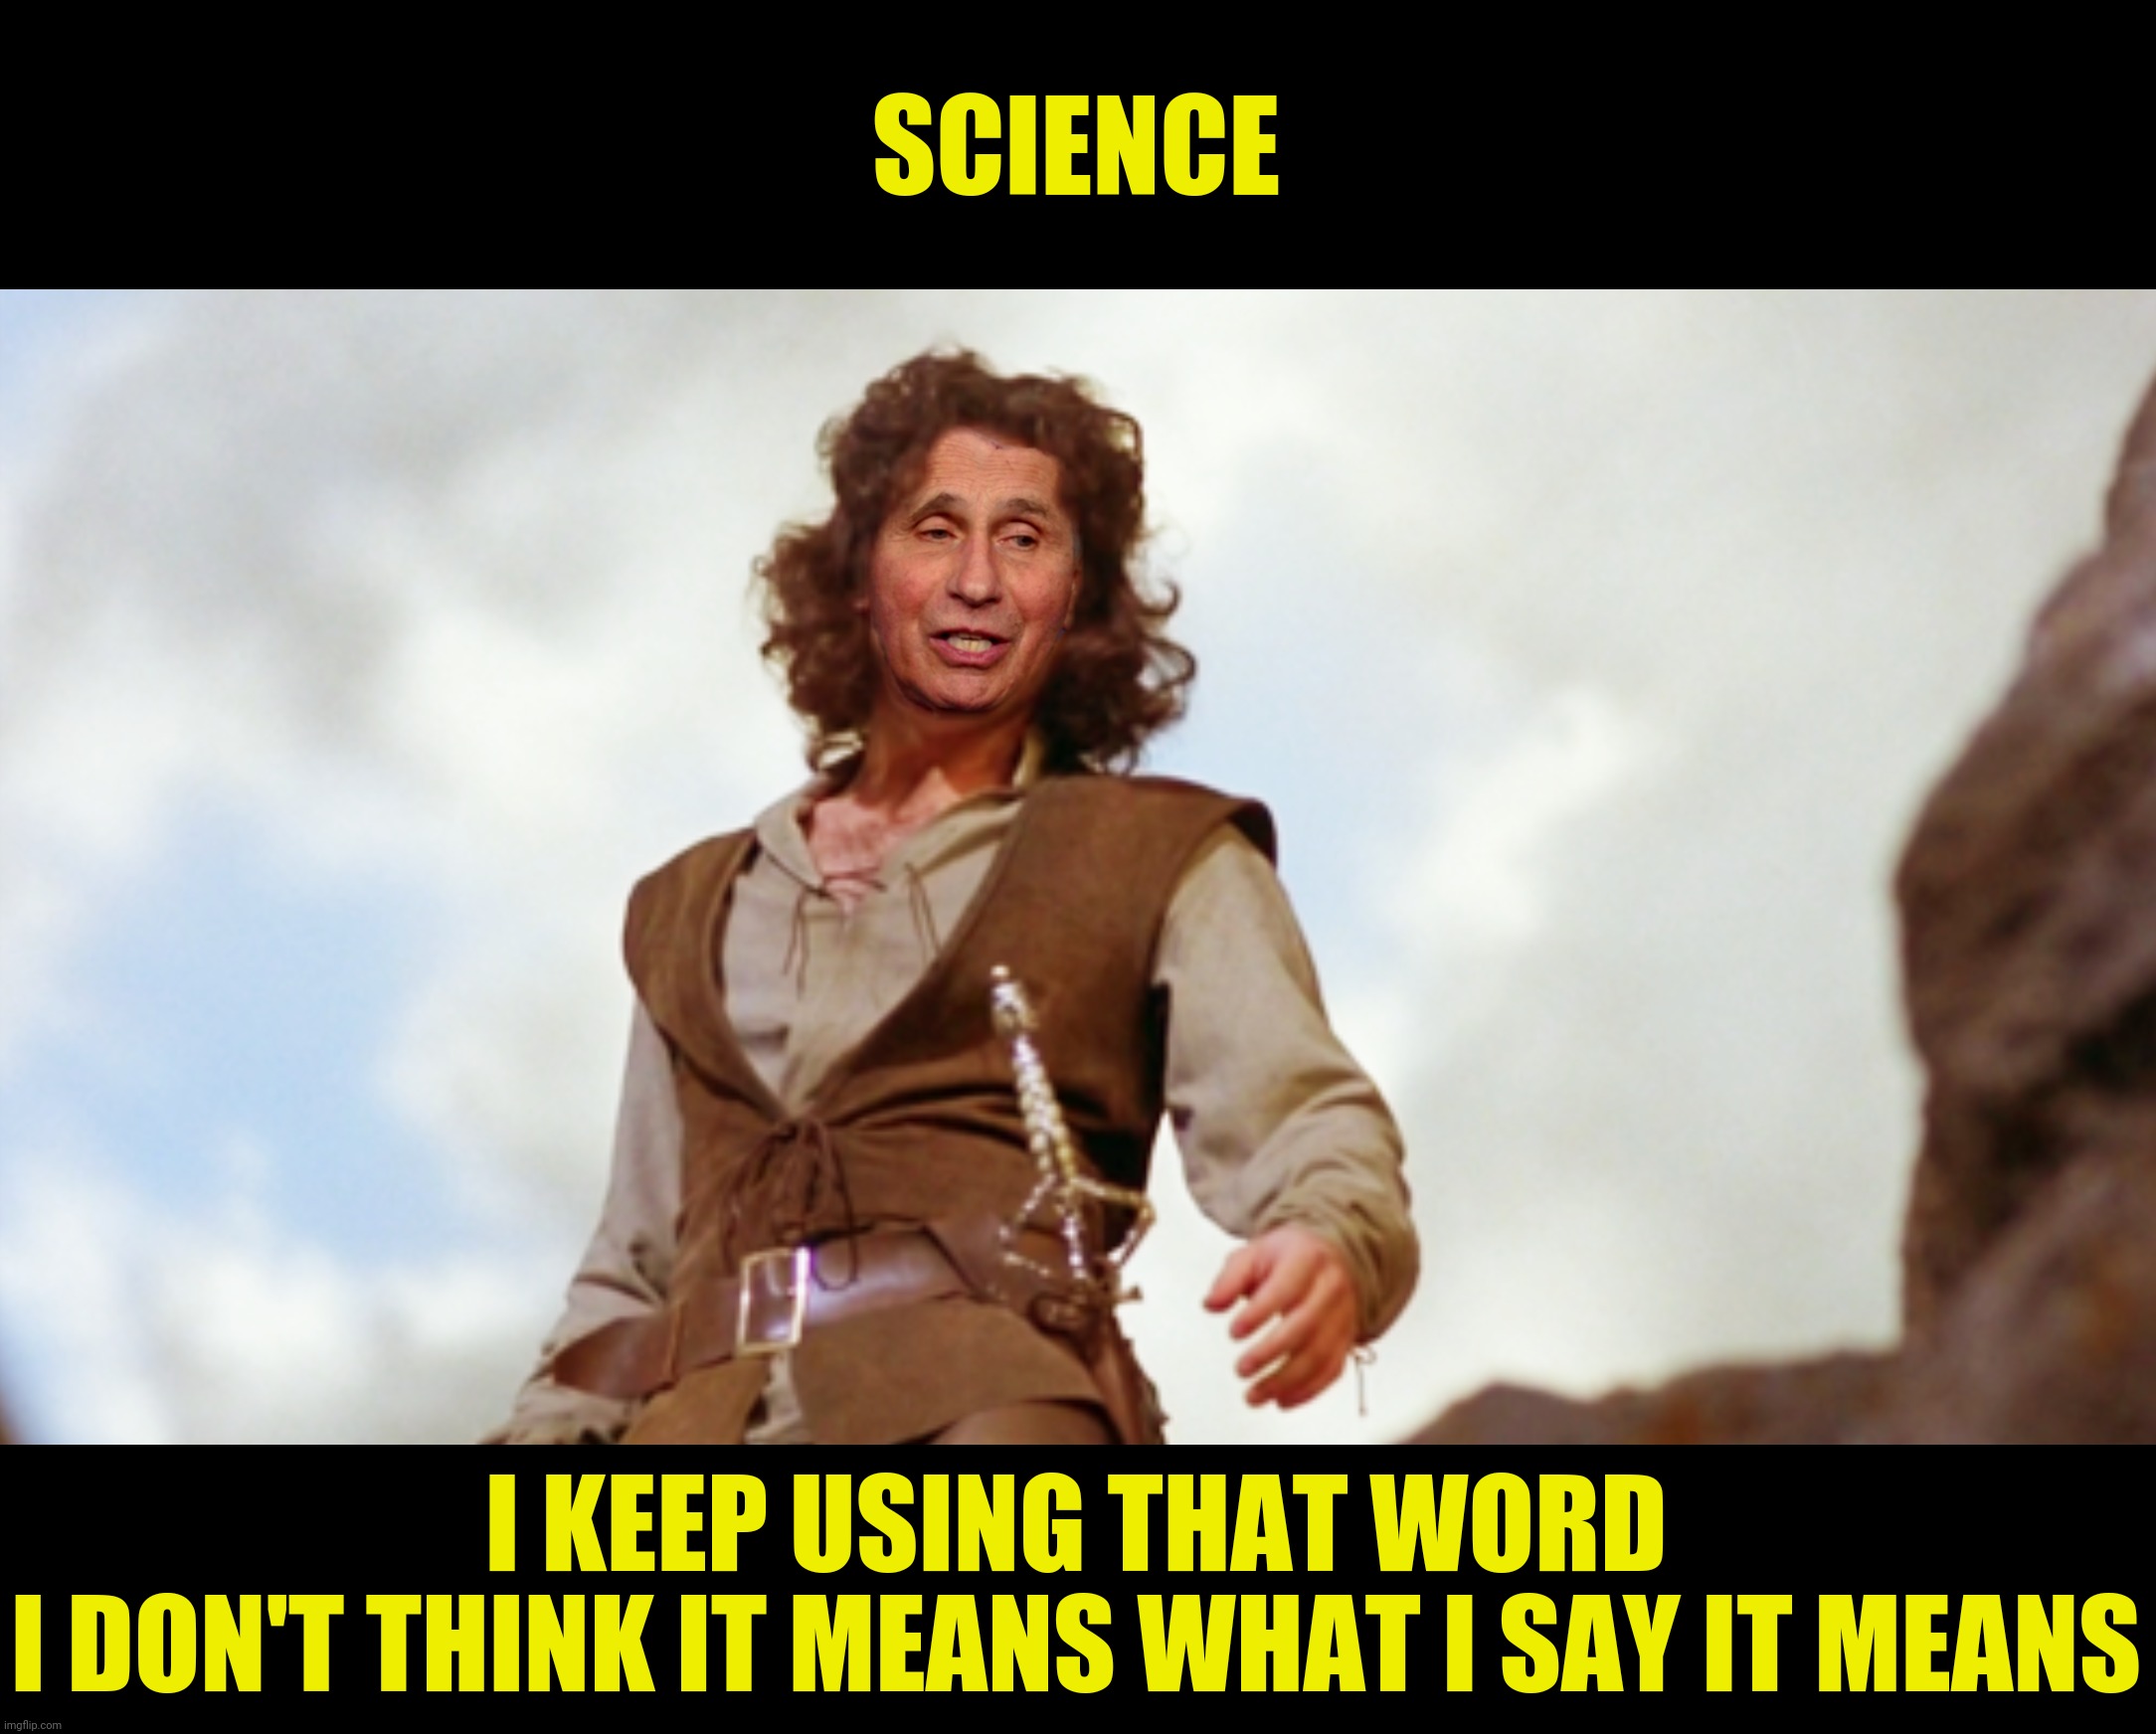 SCIENCE I KEEP USING THAT WORD
I DON'T THINK IT MEANS WHAT I SAY IT MEANS | made w/ Imgflip meme maker